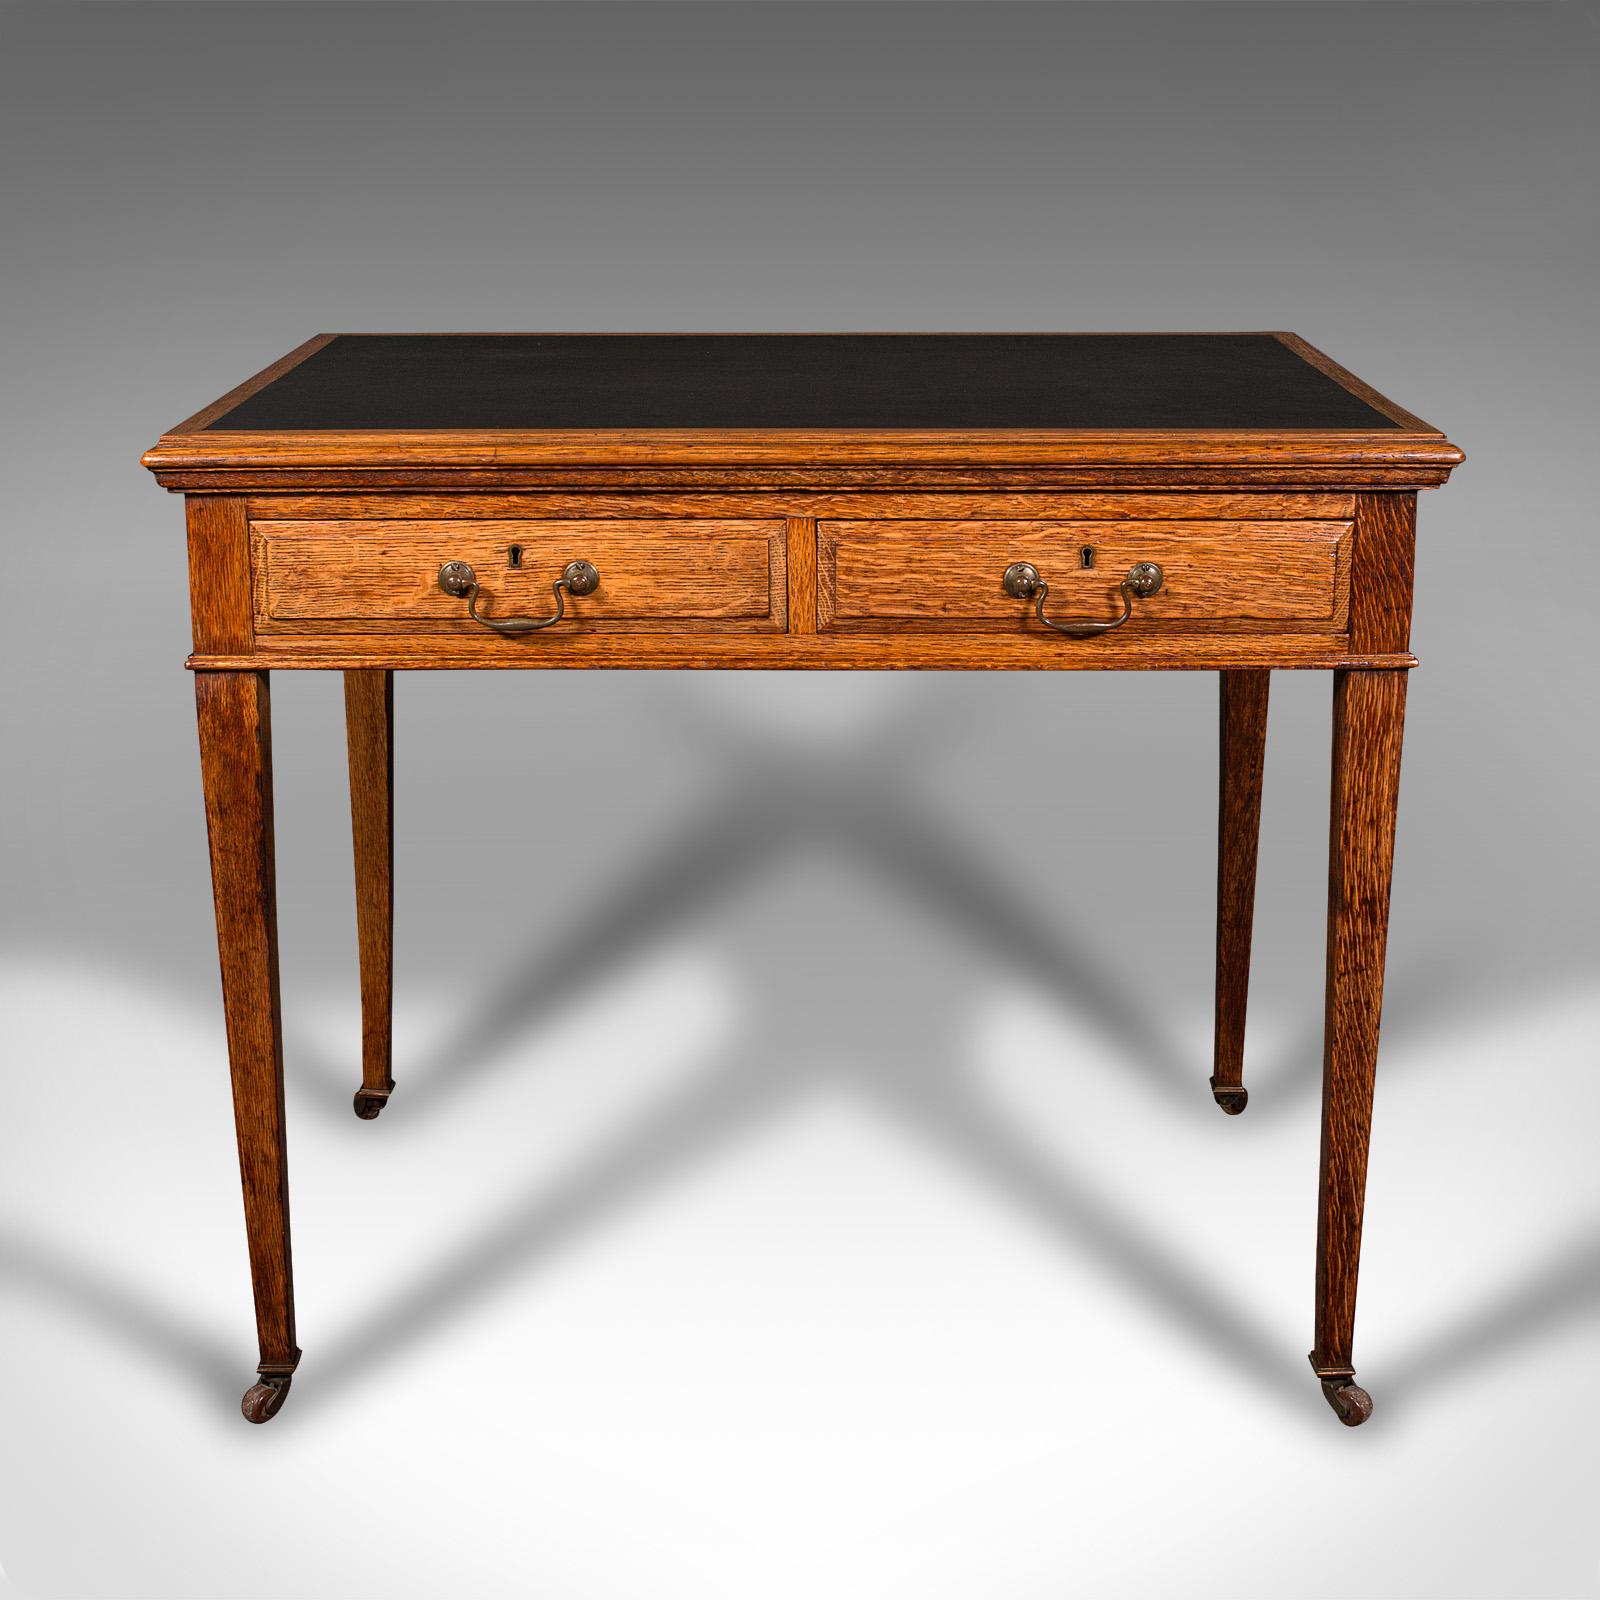 This is an antique writing desk. An English, oak and leather correspondence table, dating to the Edwardian period, circa 1910.

Of useful proportion and beautifully figured
Displays a desirable aged patina and in good order
Striking quarter sawn oak